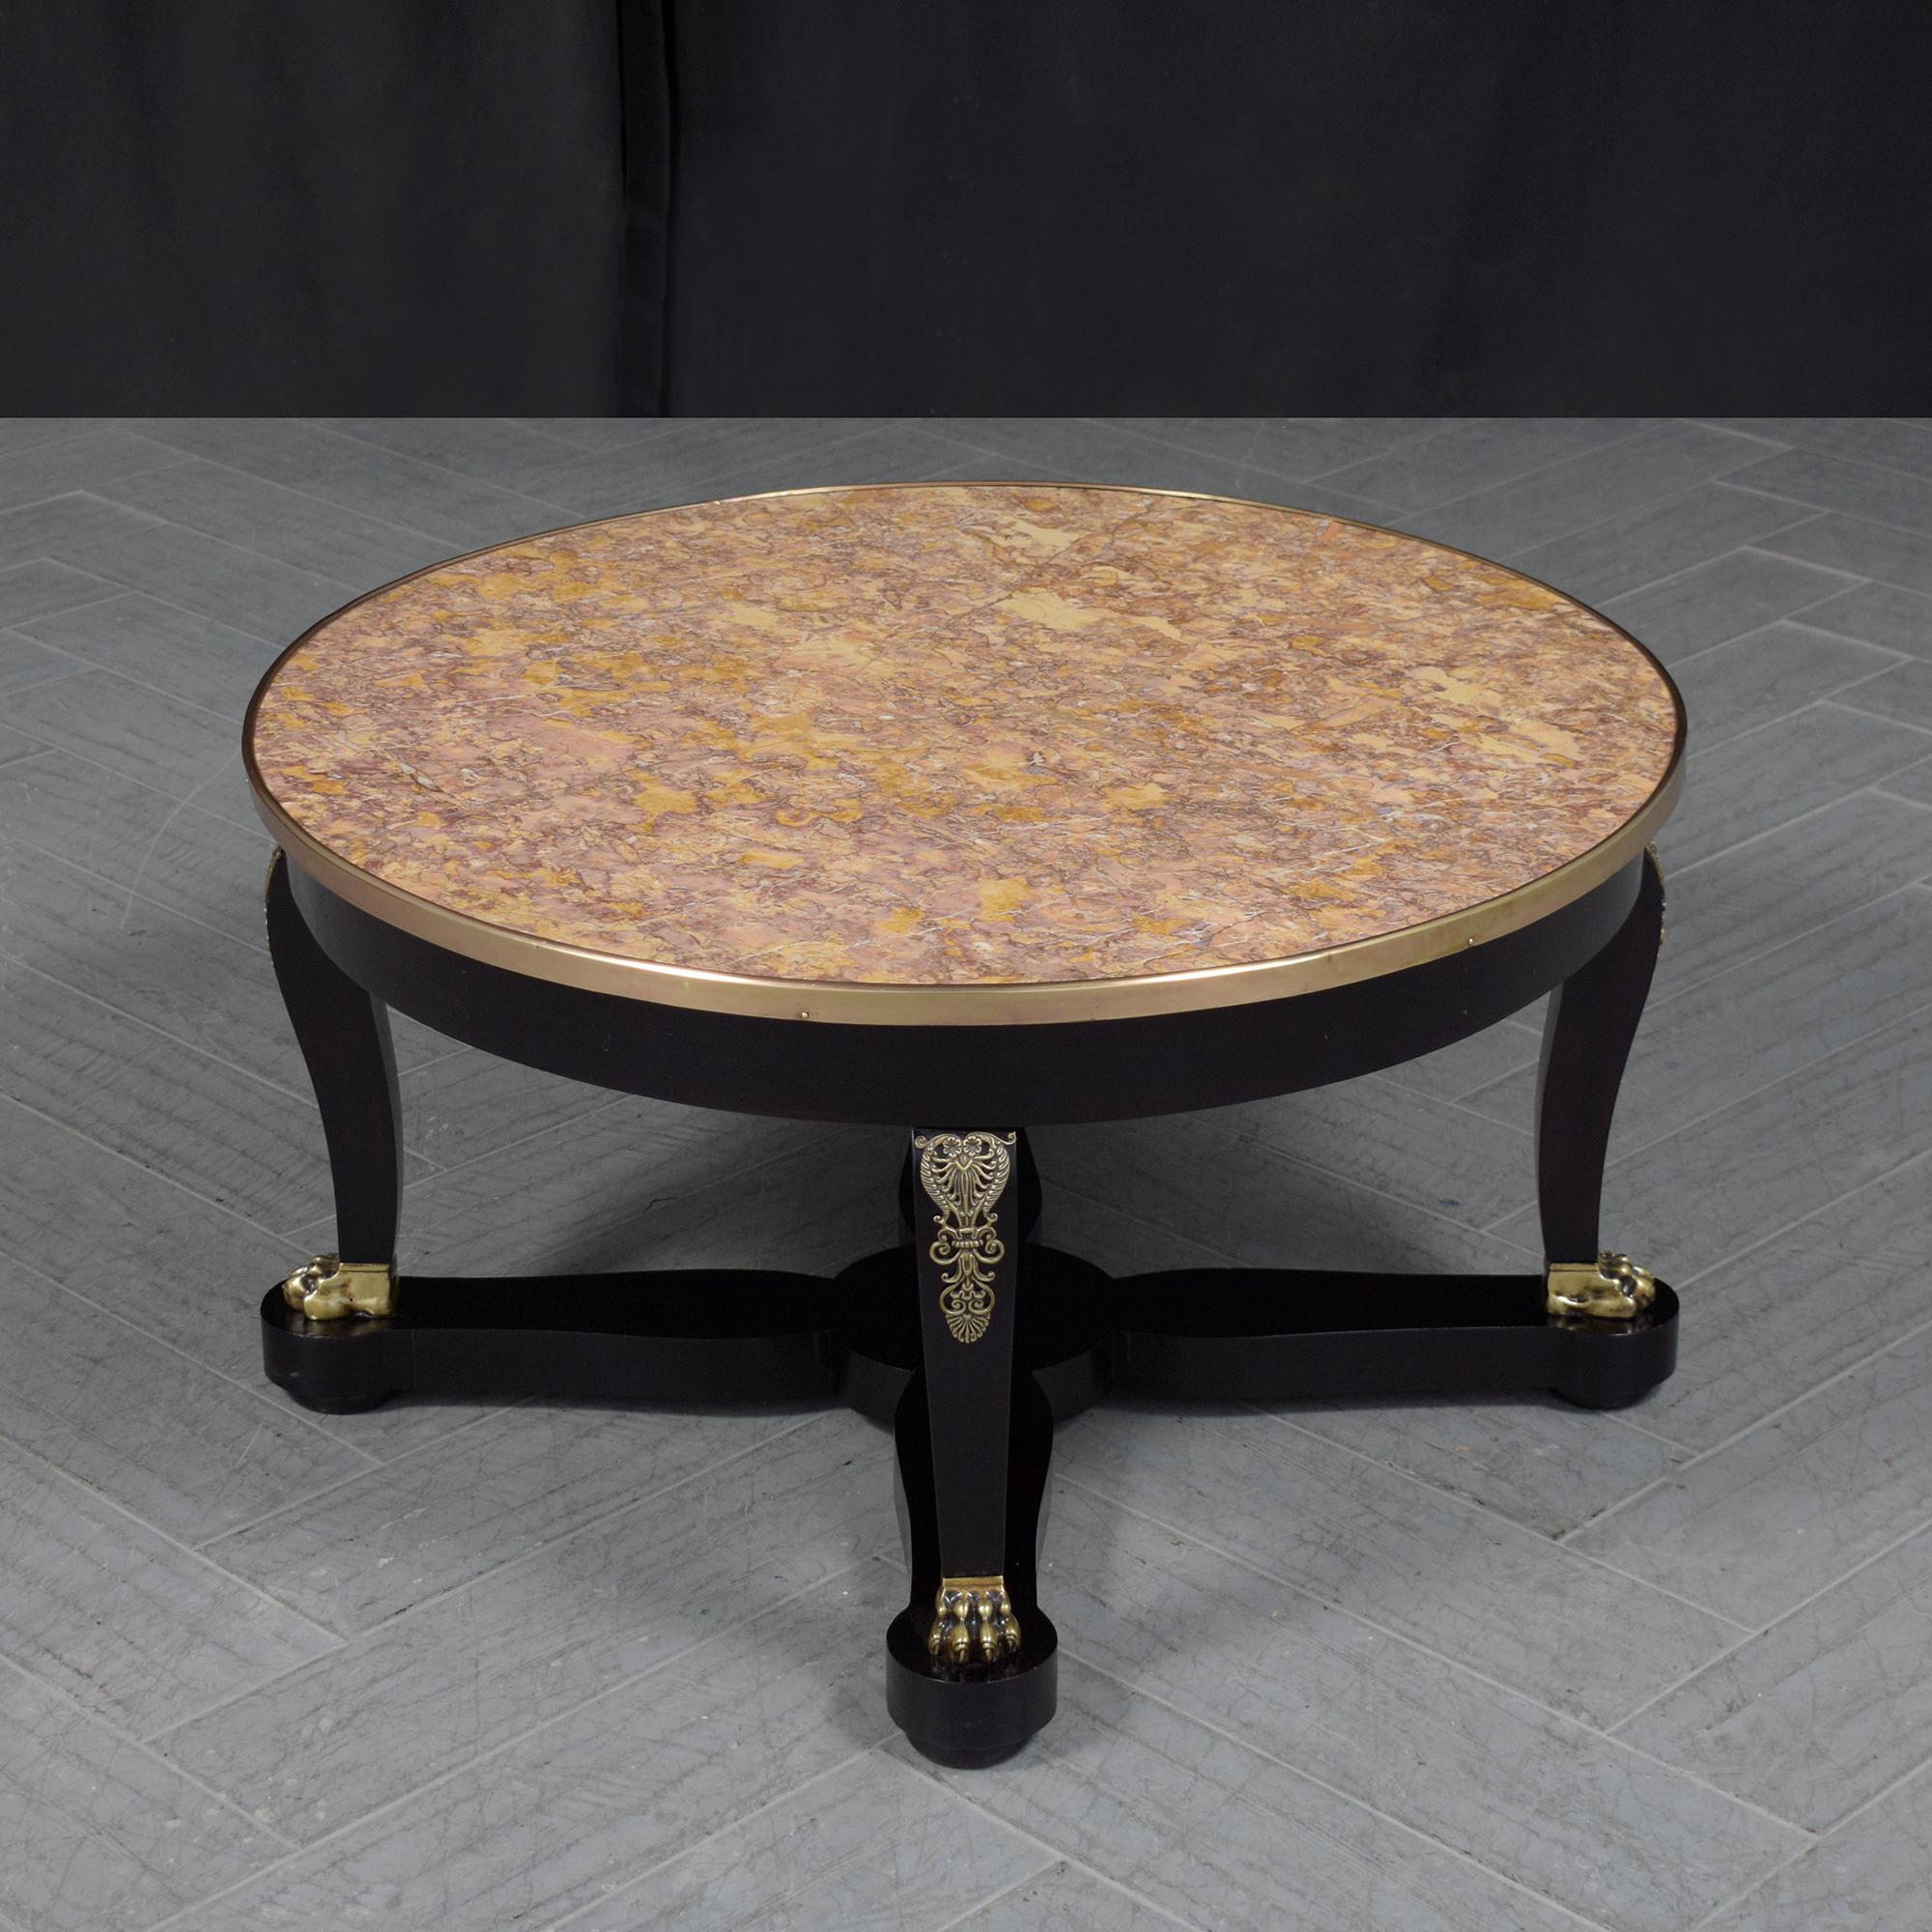 Discover the grandeur of the 1880s with our exquisite antique coffee table, a testament to the lavish Empire-style craftsmanship. Expertly restored by our seasoned craftsmen, this piece stands in great condition, ready to add a touch of historical